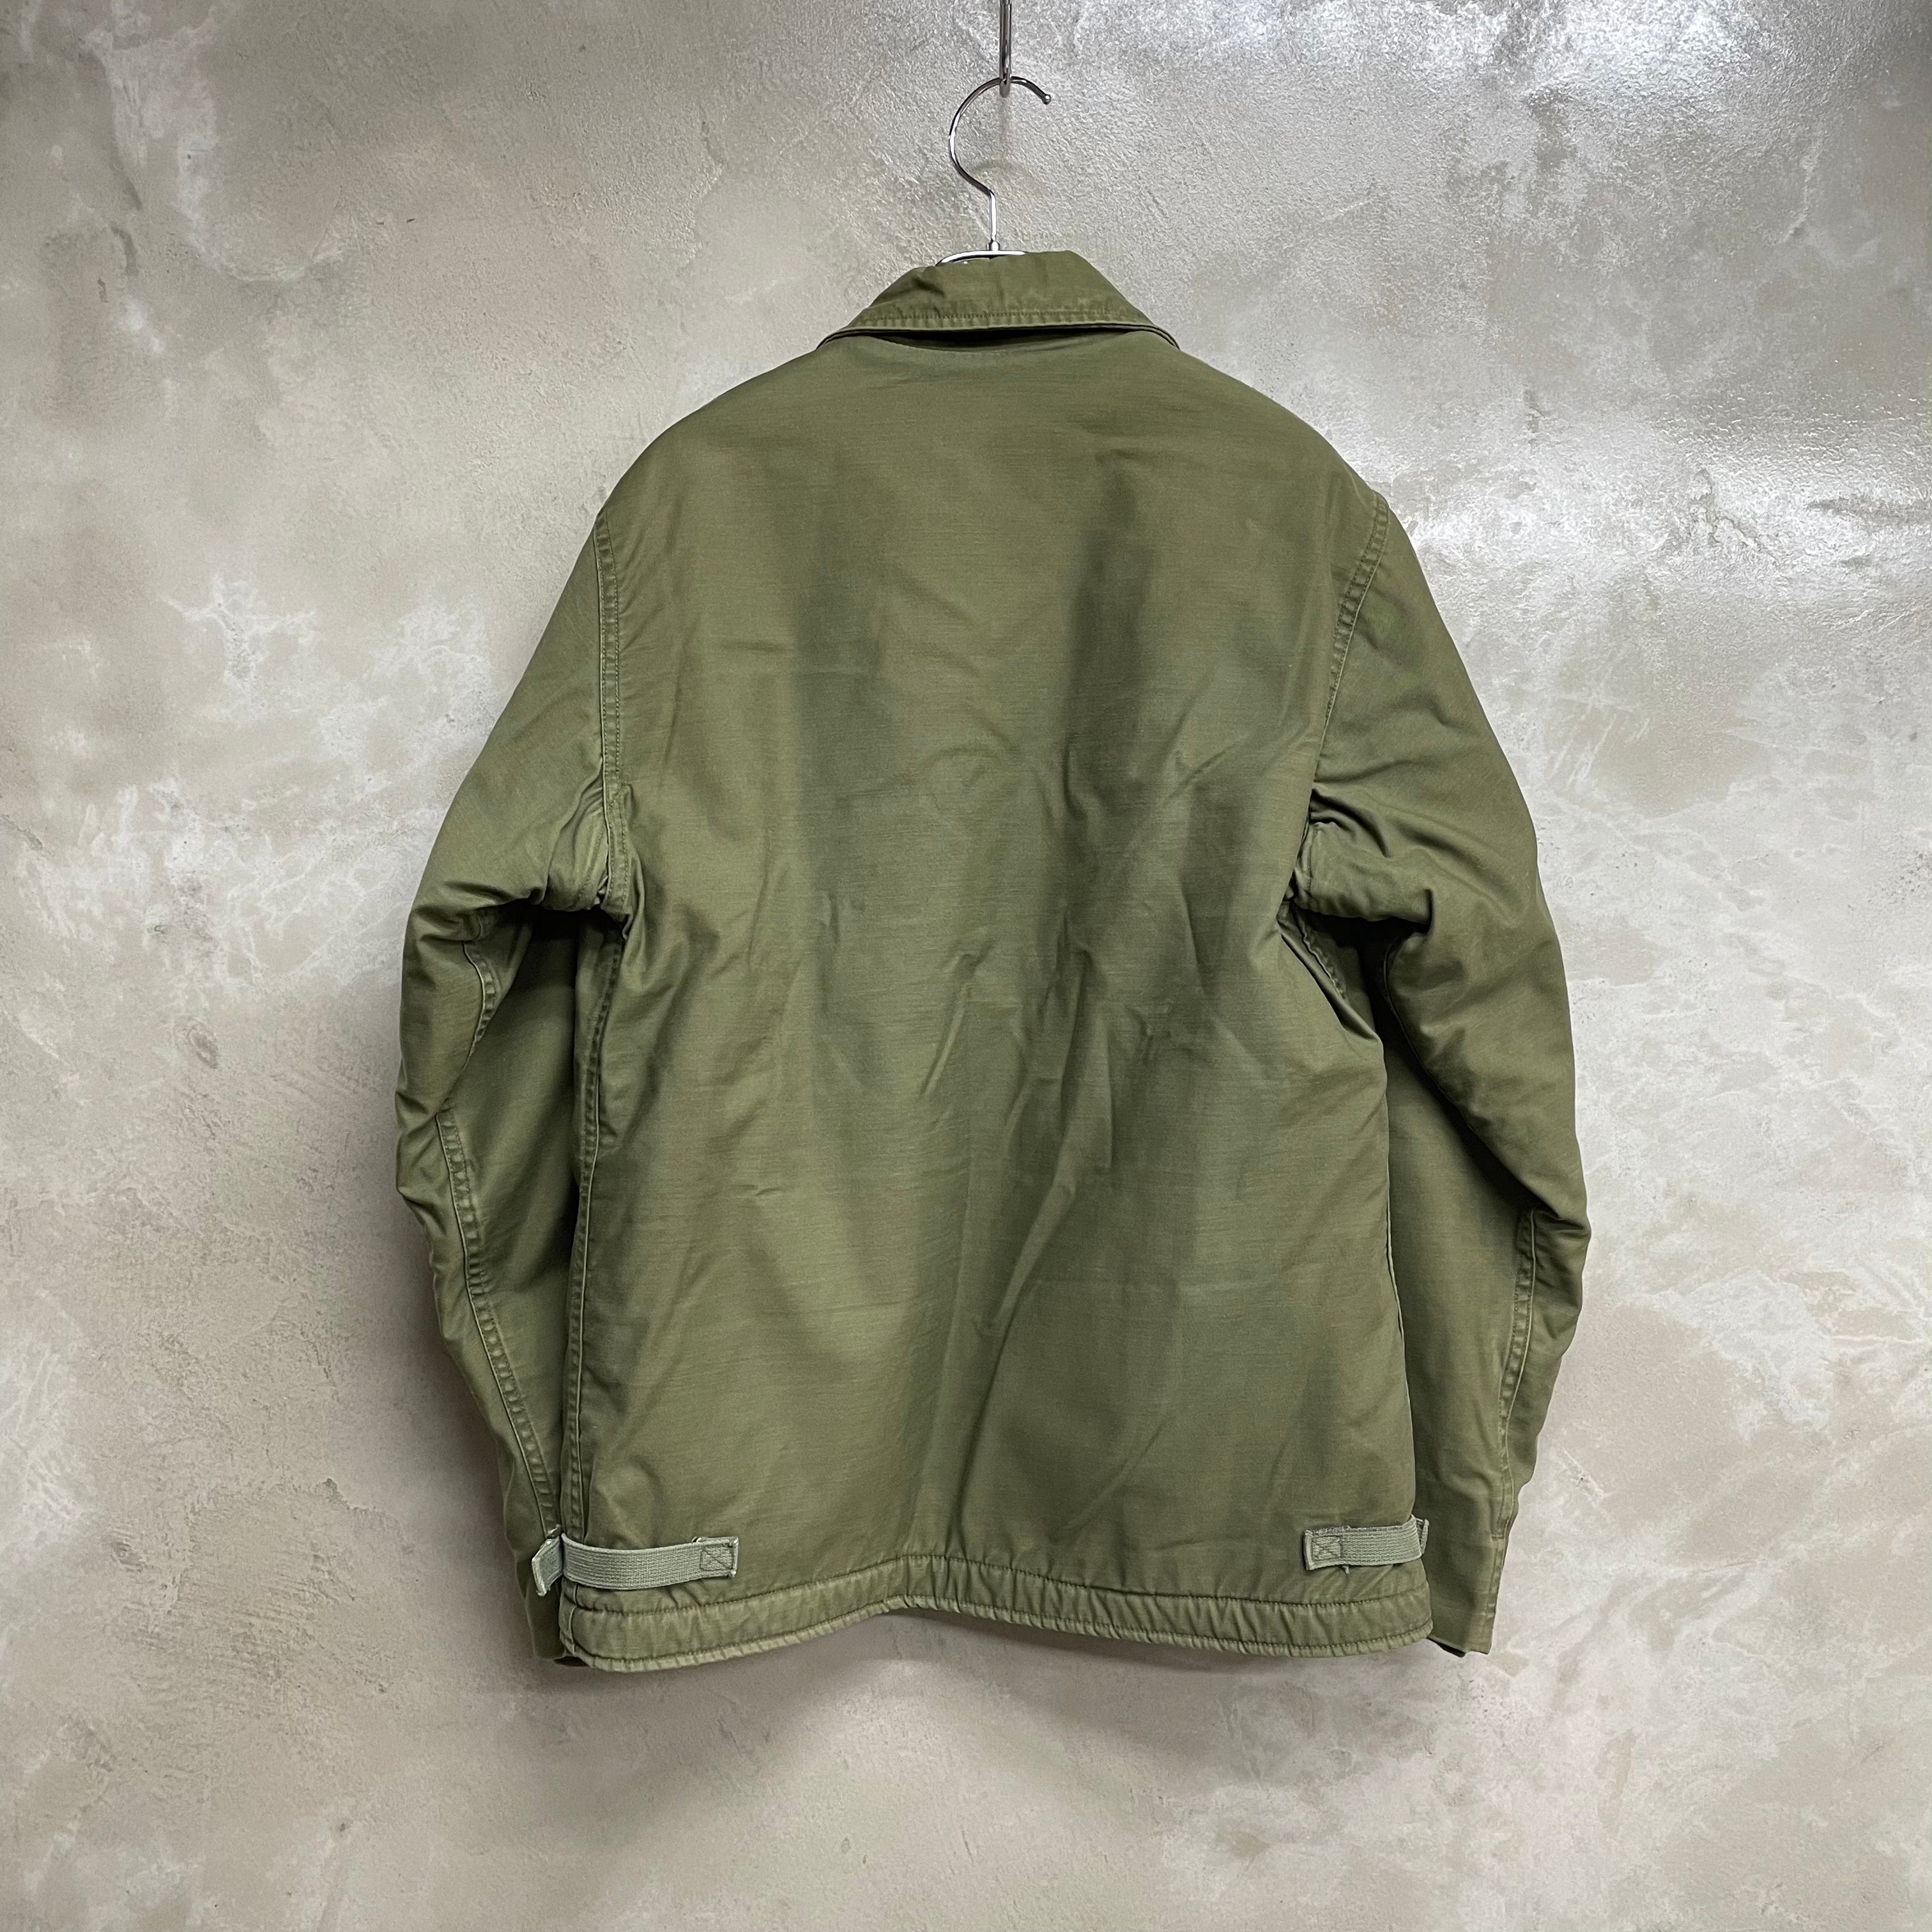 [ ONLY ONE ! ] U. S. NAVY 73's A-2 DECK JACKET / Mr.Clean Select